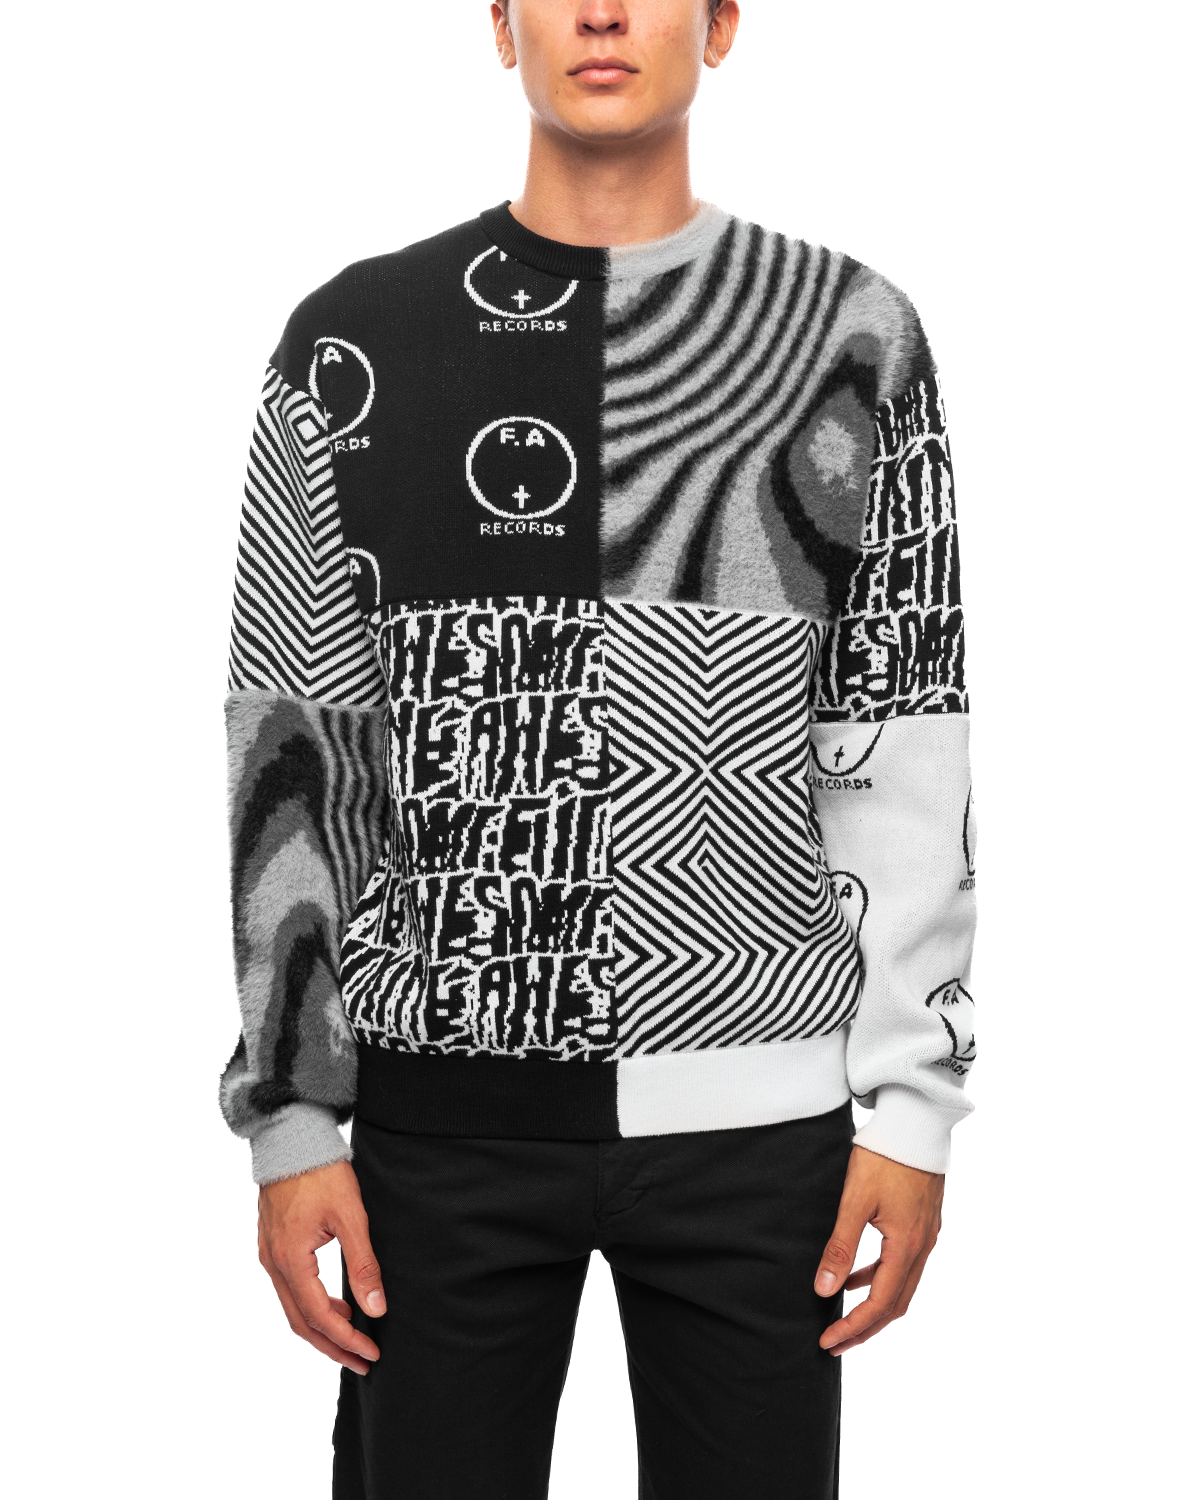 Cult of Personality Sweater Black/White/Grey